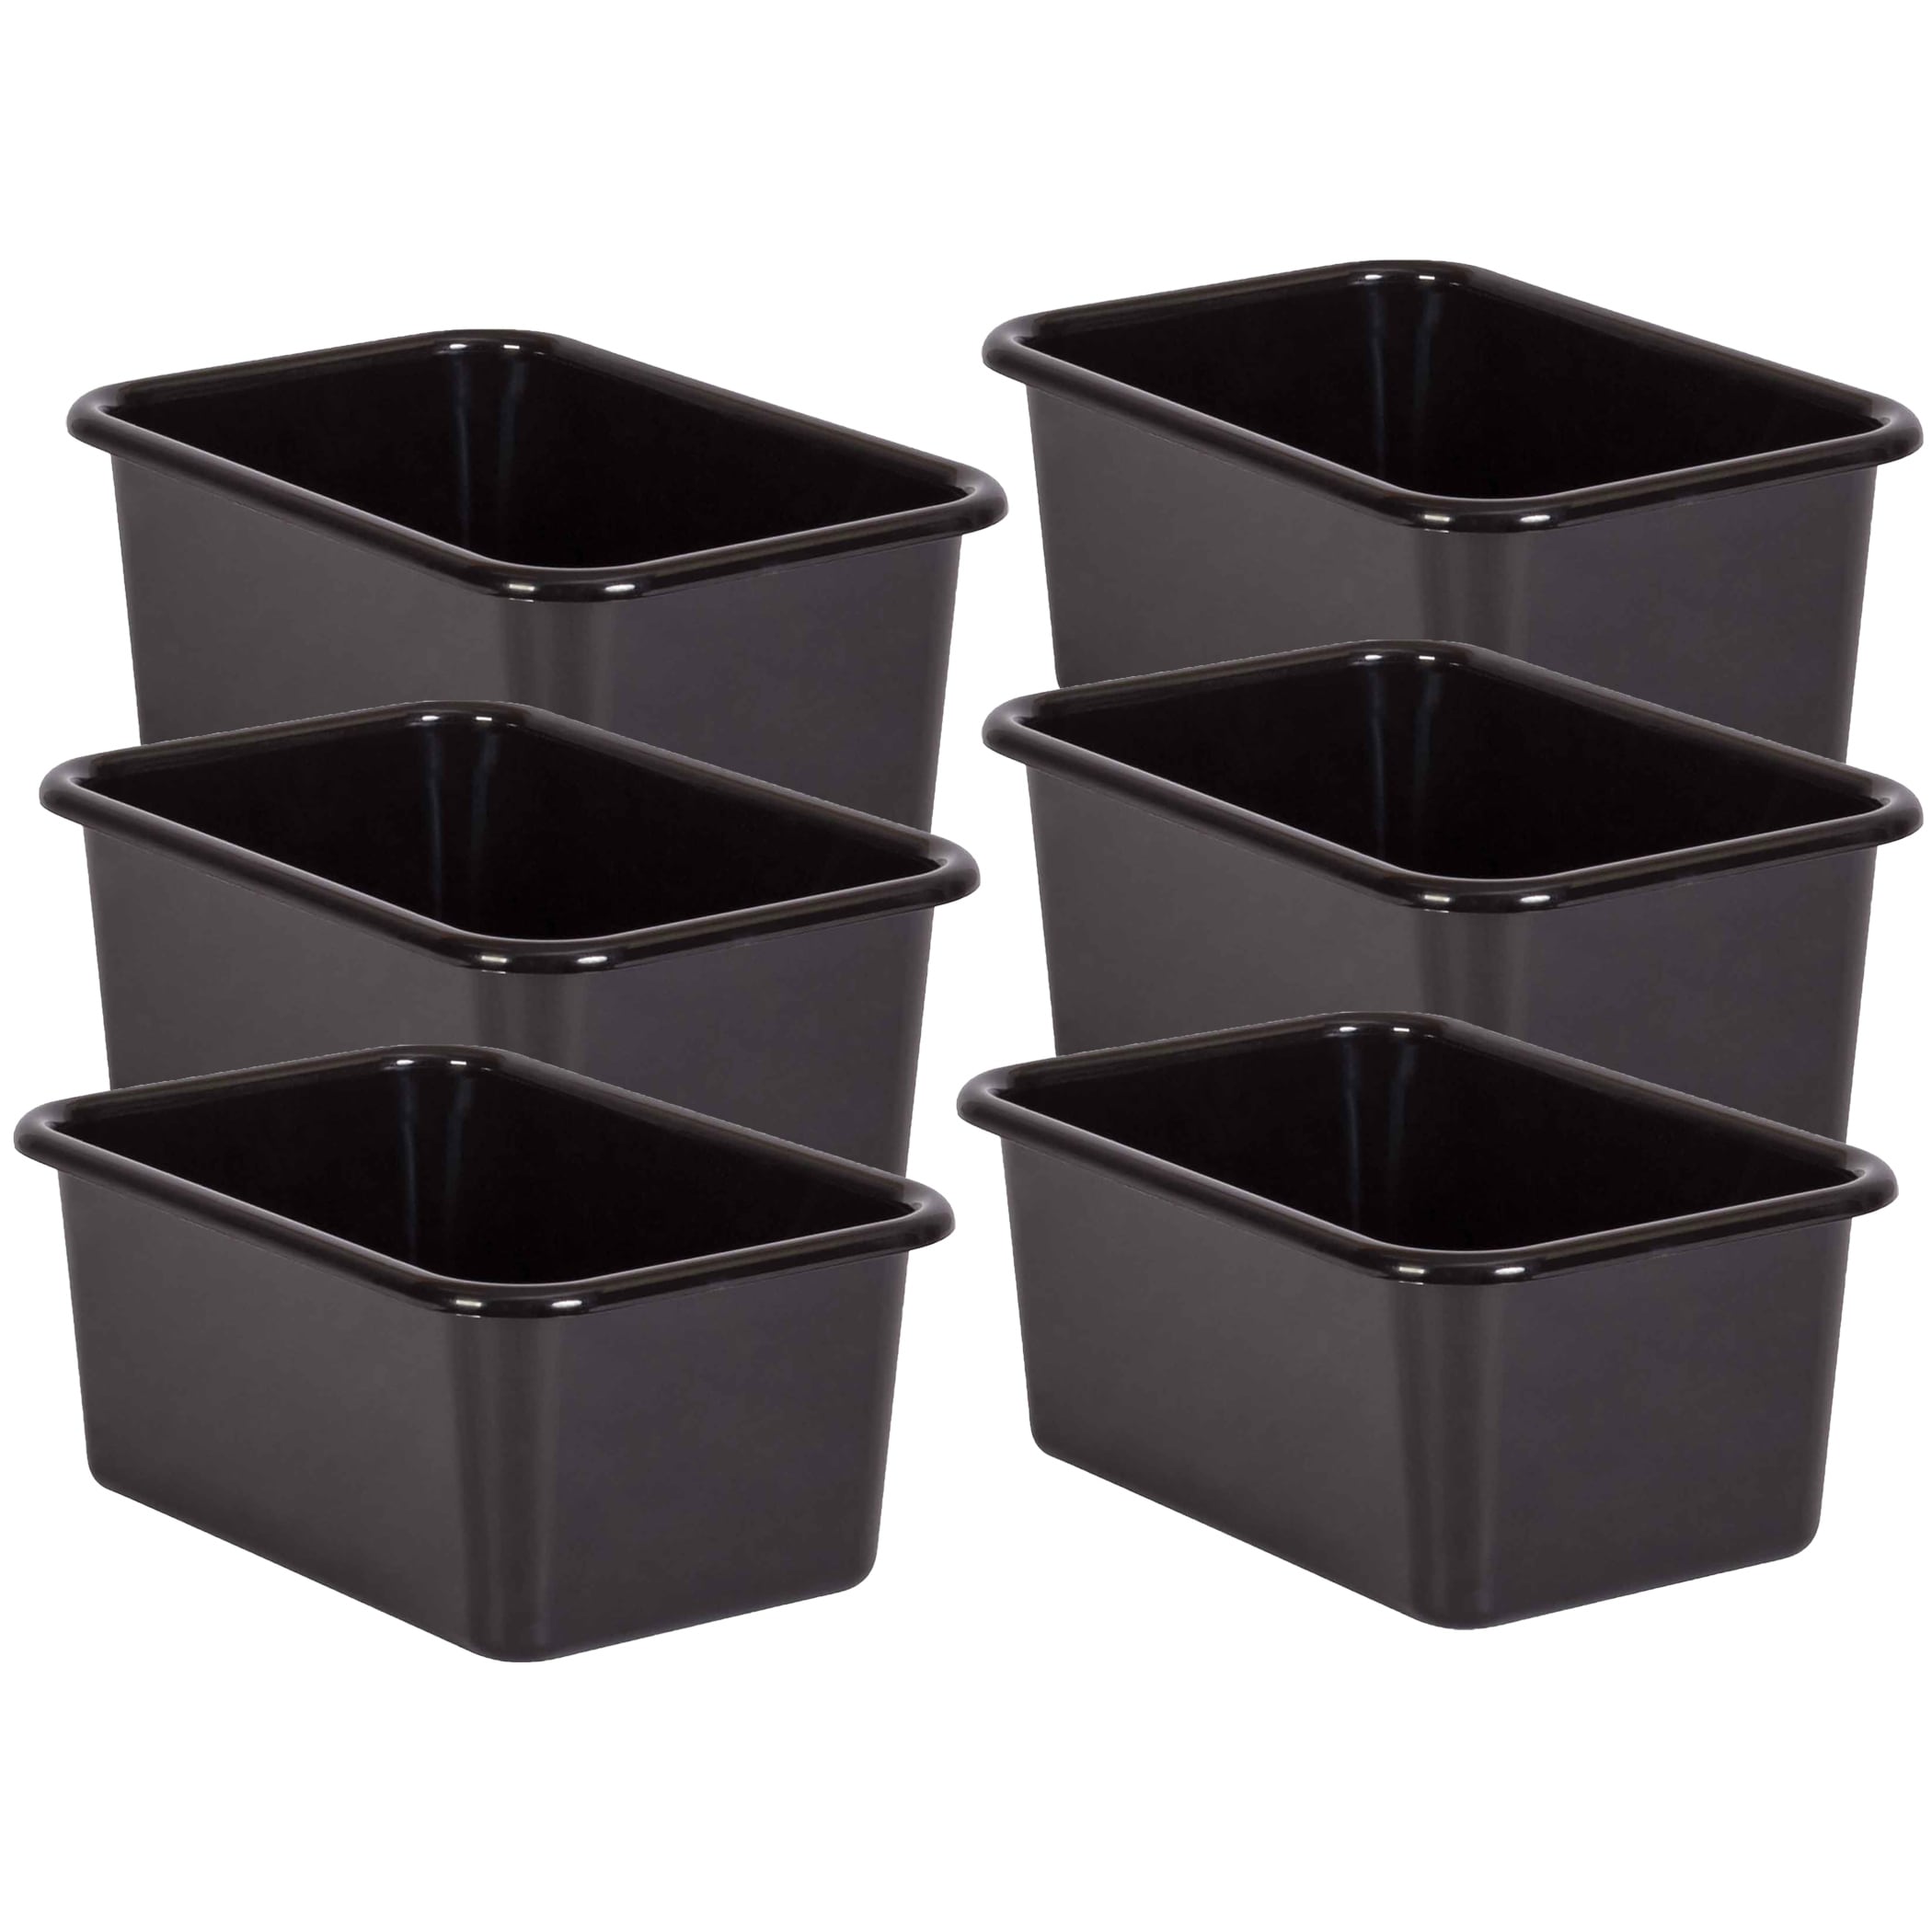 https://ak1.ostkcdn.com/images/products/is/images/direct/30f4f029b0b7bdcae4ea9ffdf10c3573f1f5d90d/Teacher-Created-Resources-Black-Small-Plastic-Storage-Bin%2C-Pack-of-6.jpg